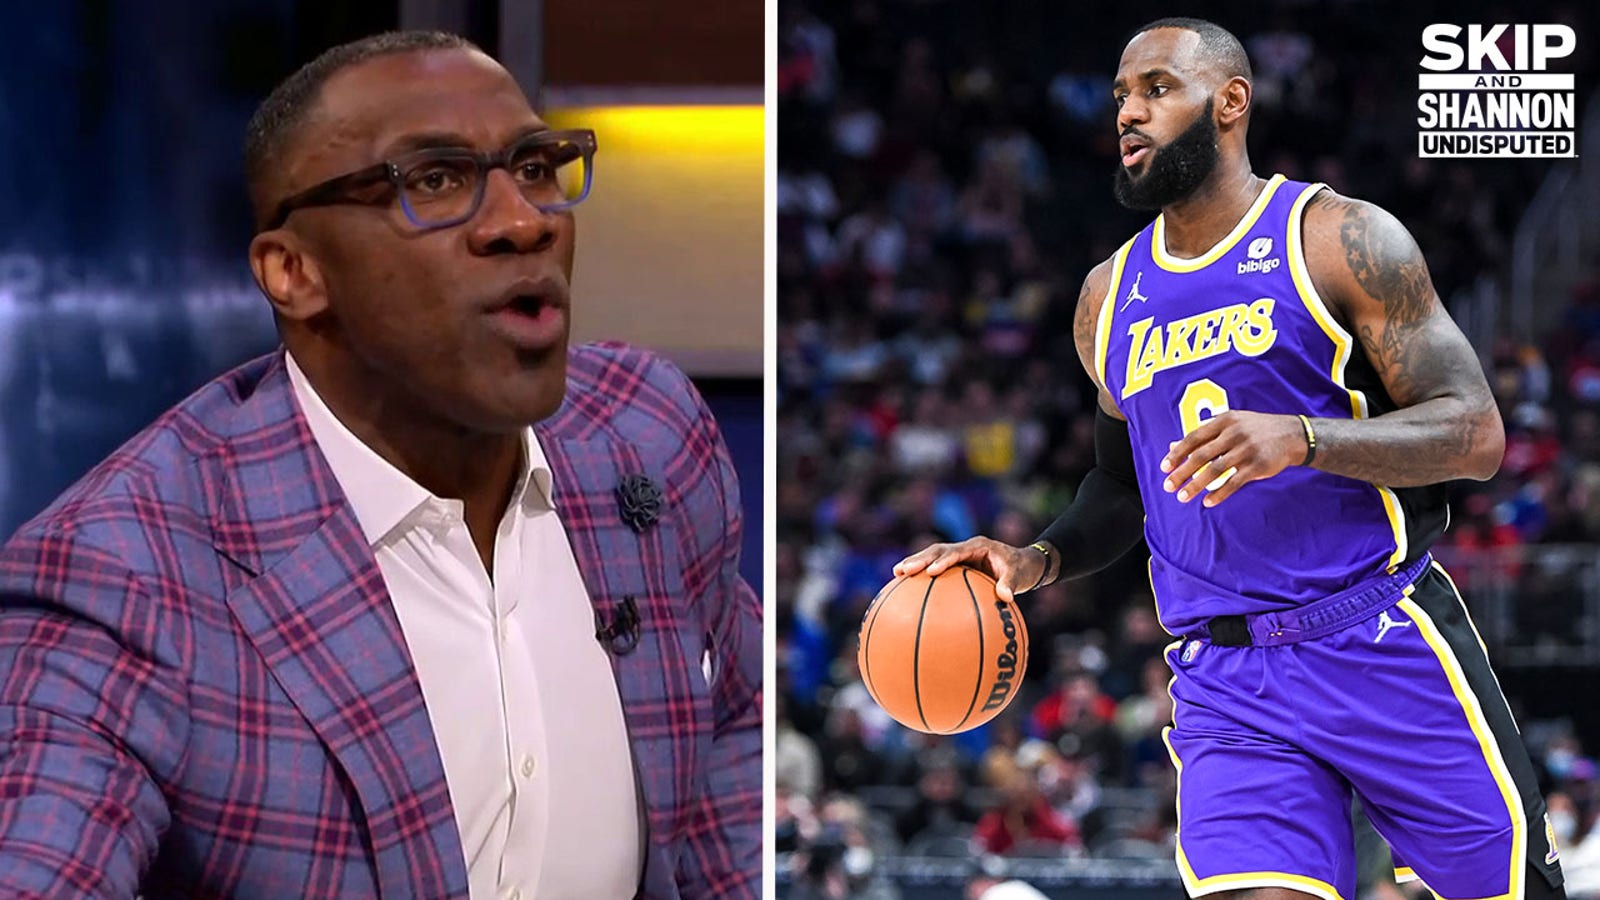 Shannon Sharpe: If Isaiah Stewart did not react the way he did, neither he nor LeBron would be suspended